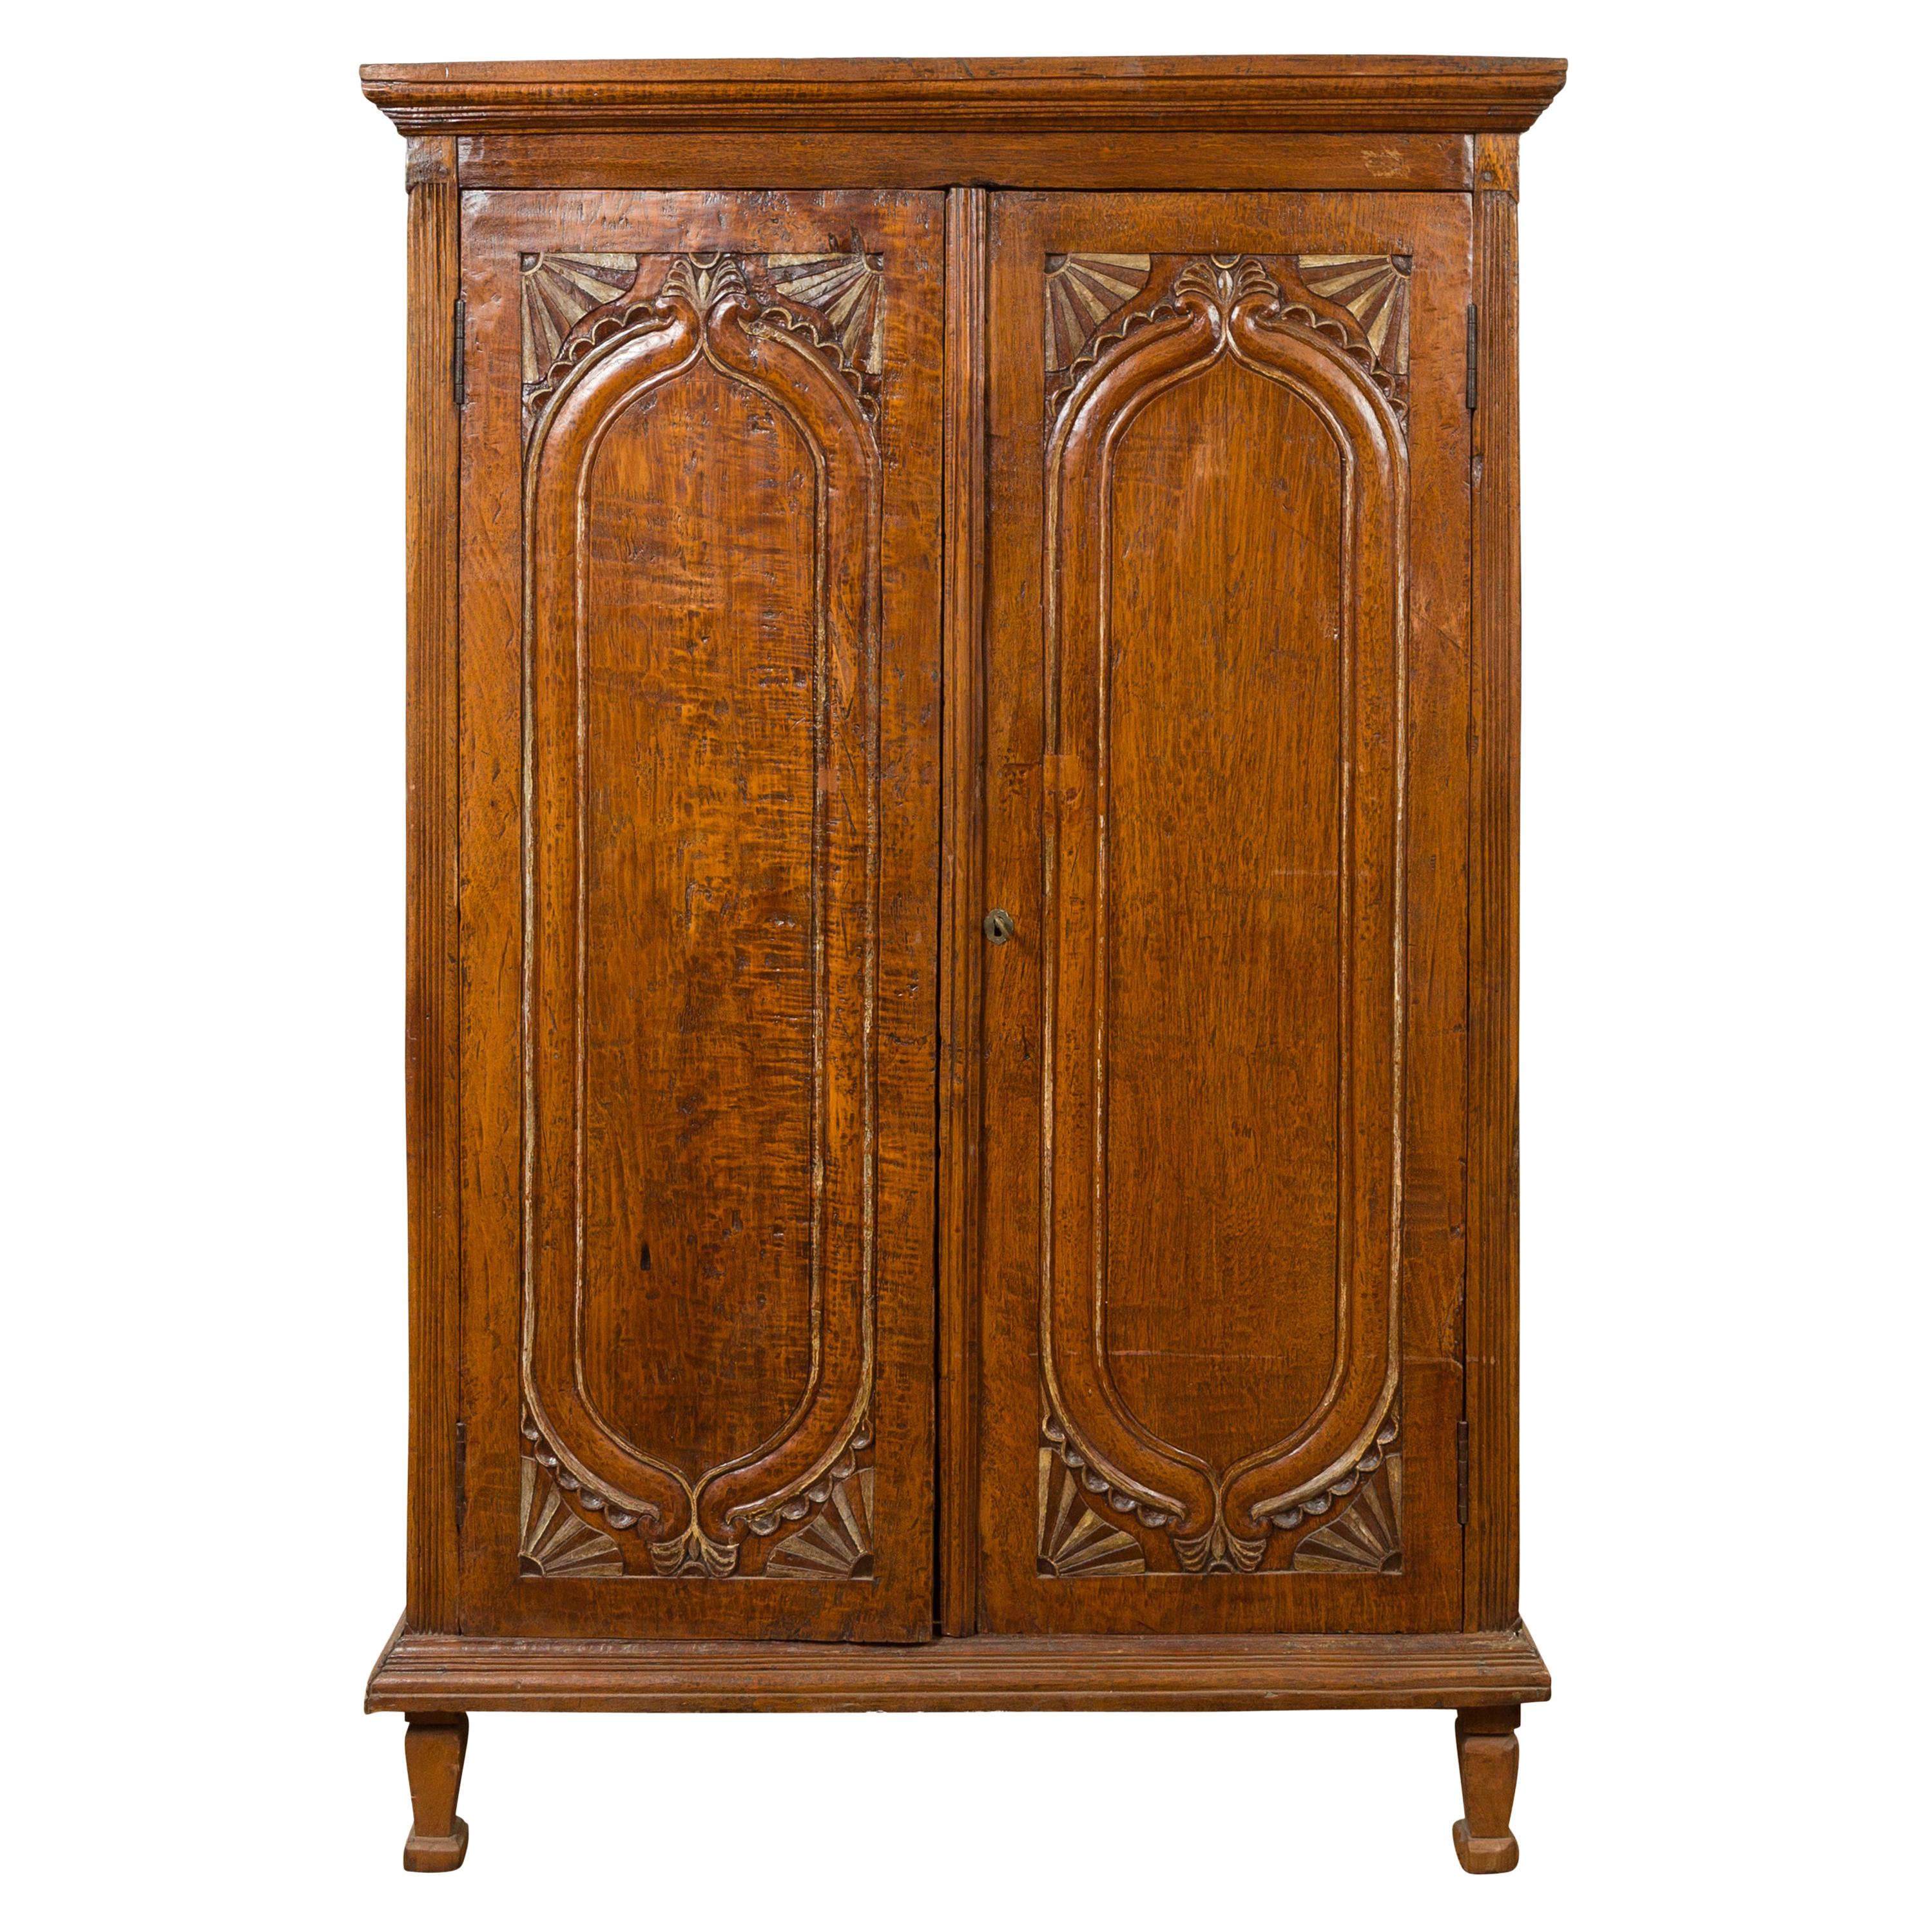 Dutch Colonial Late 19th Century Teak Wood Cabinet with Carved Fan Motifs